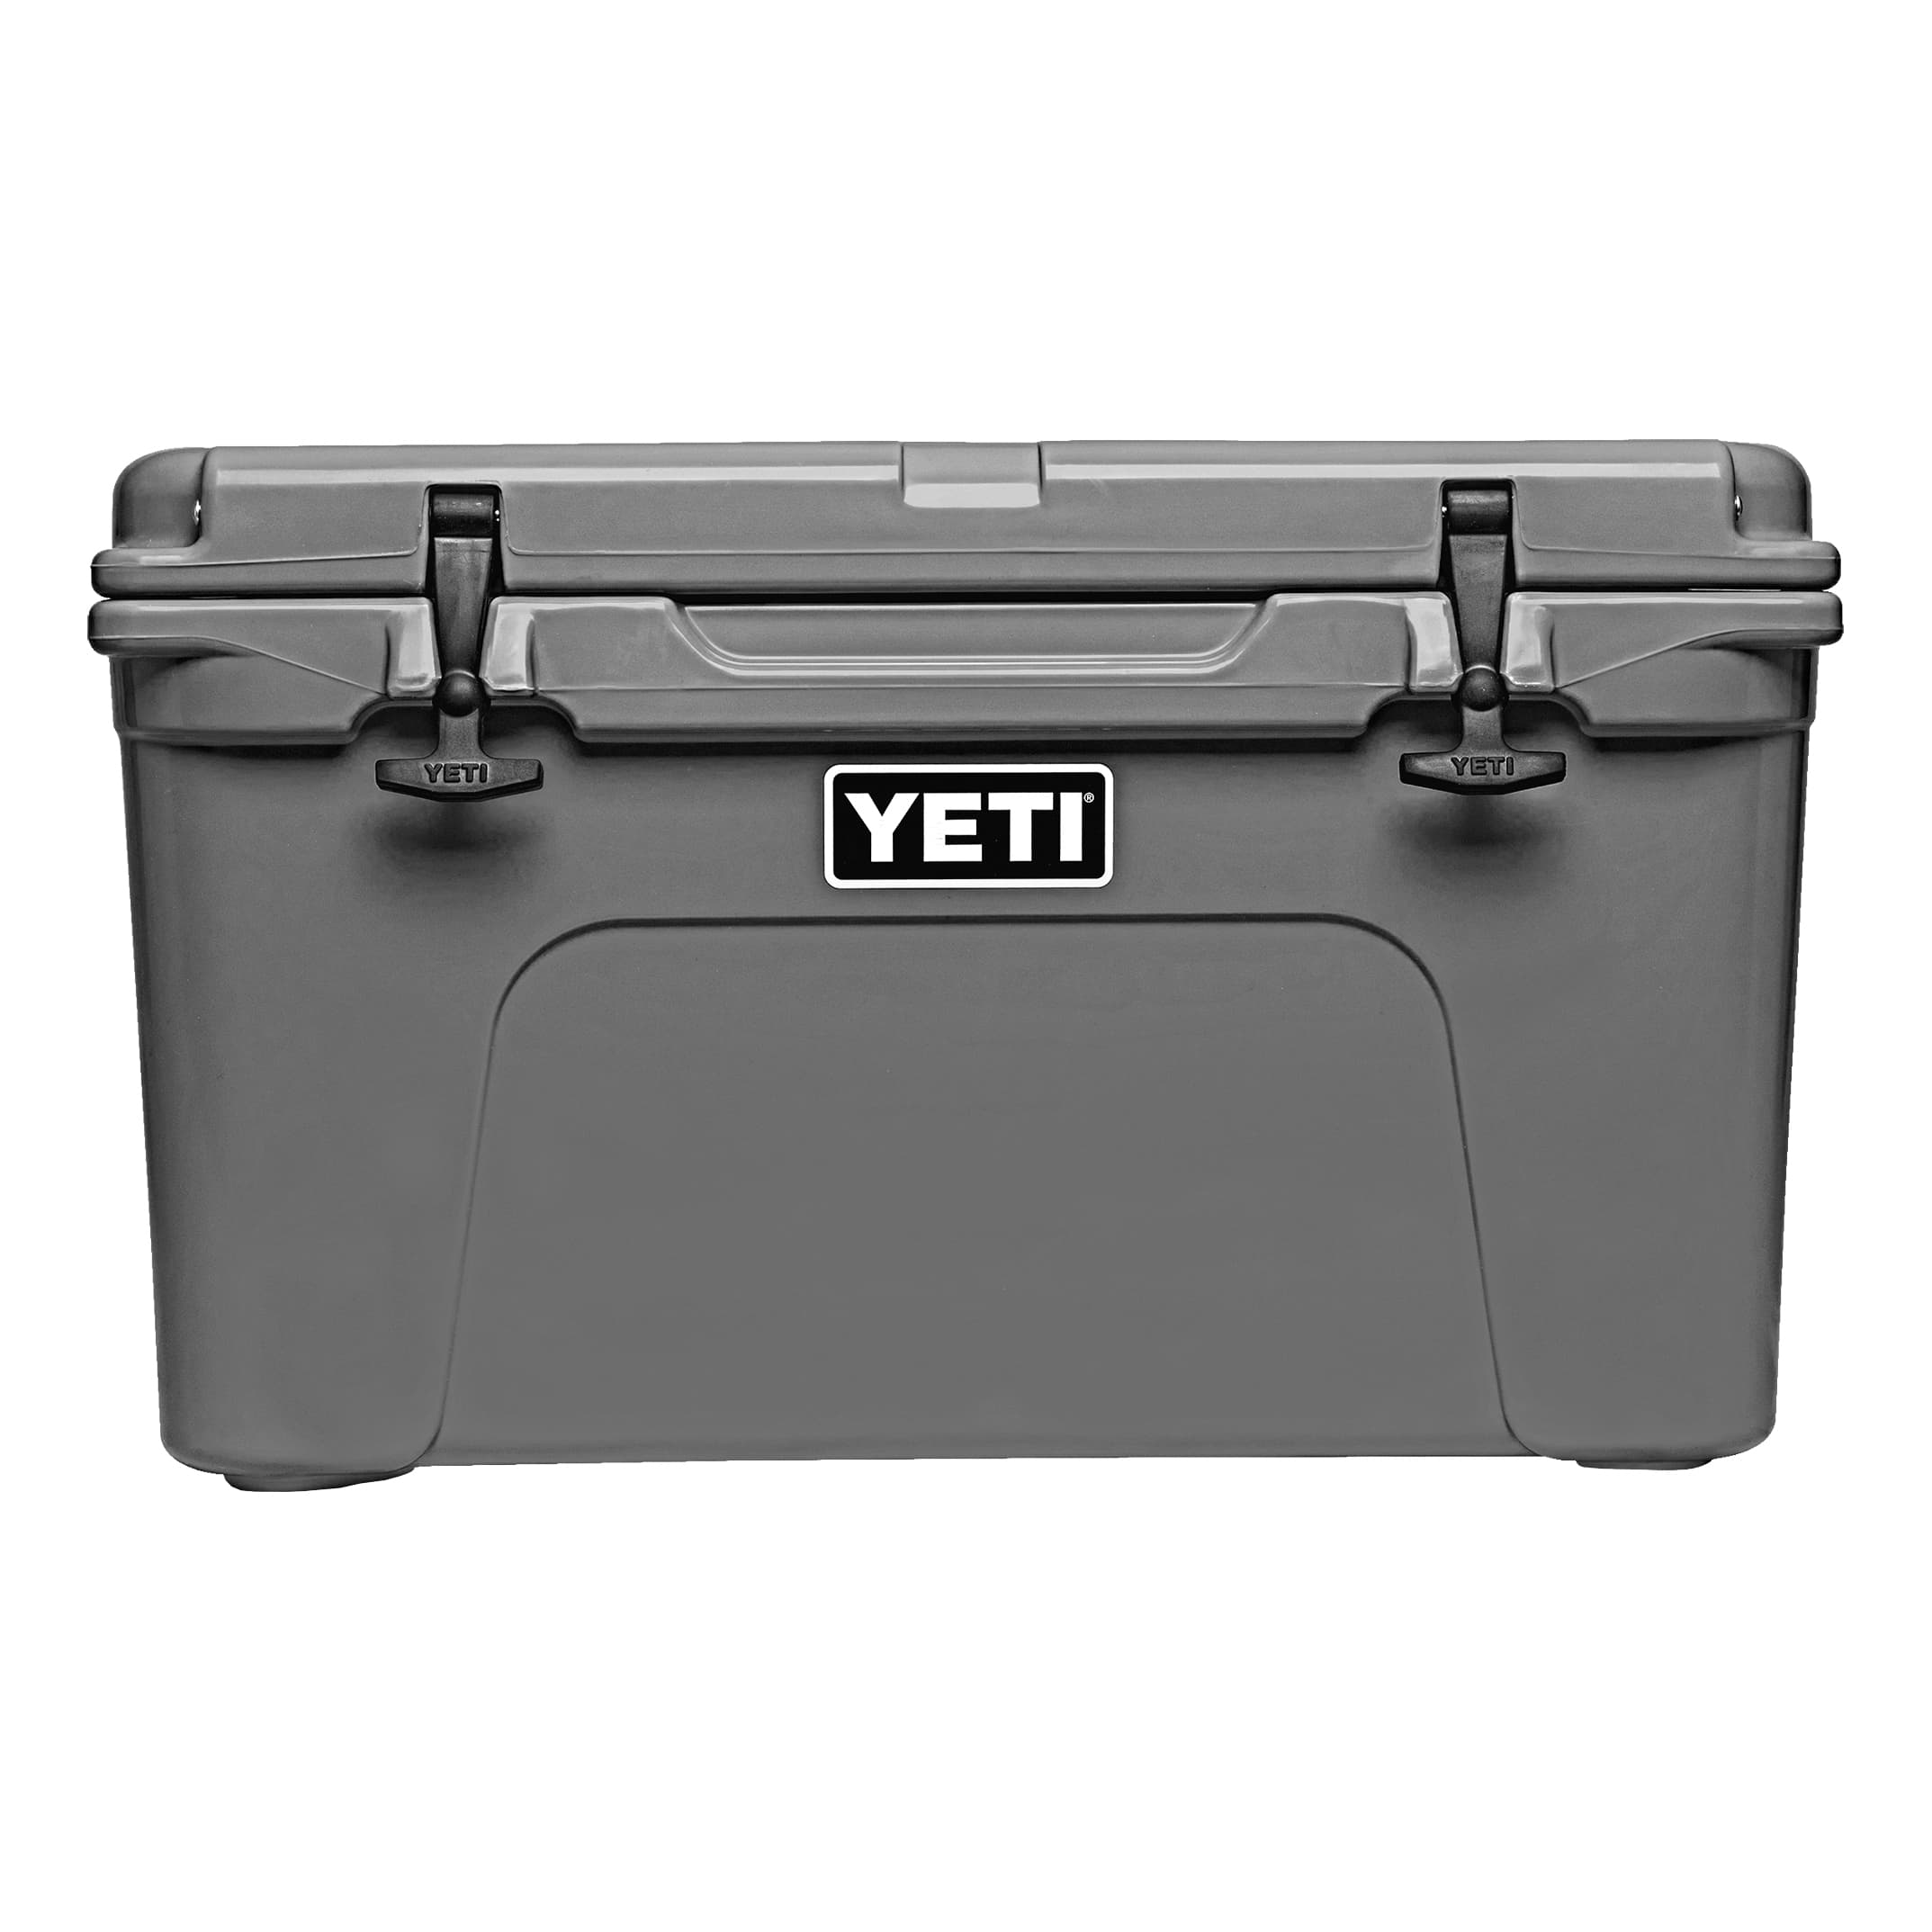 Yeti Coolers Tundra 45 Series Cooler - Charcoal